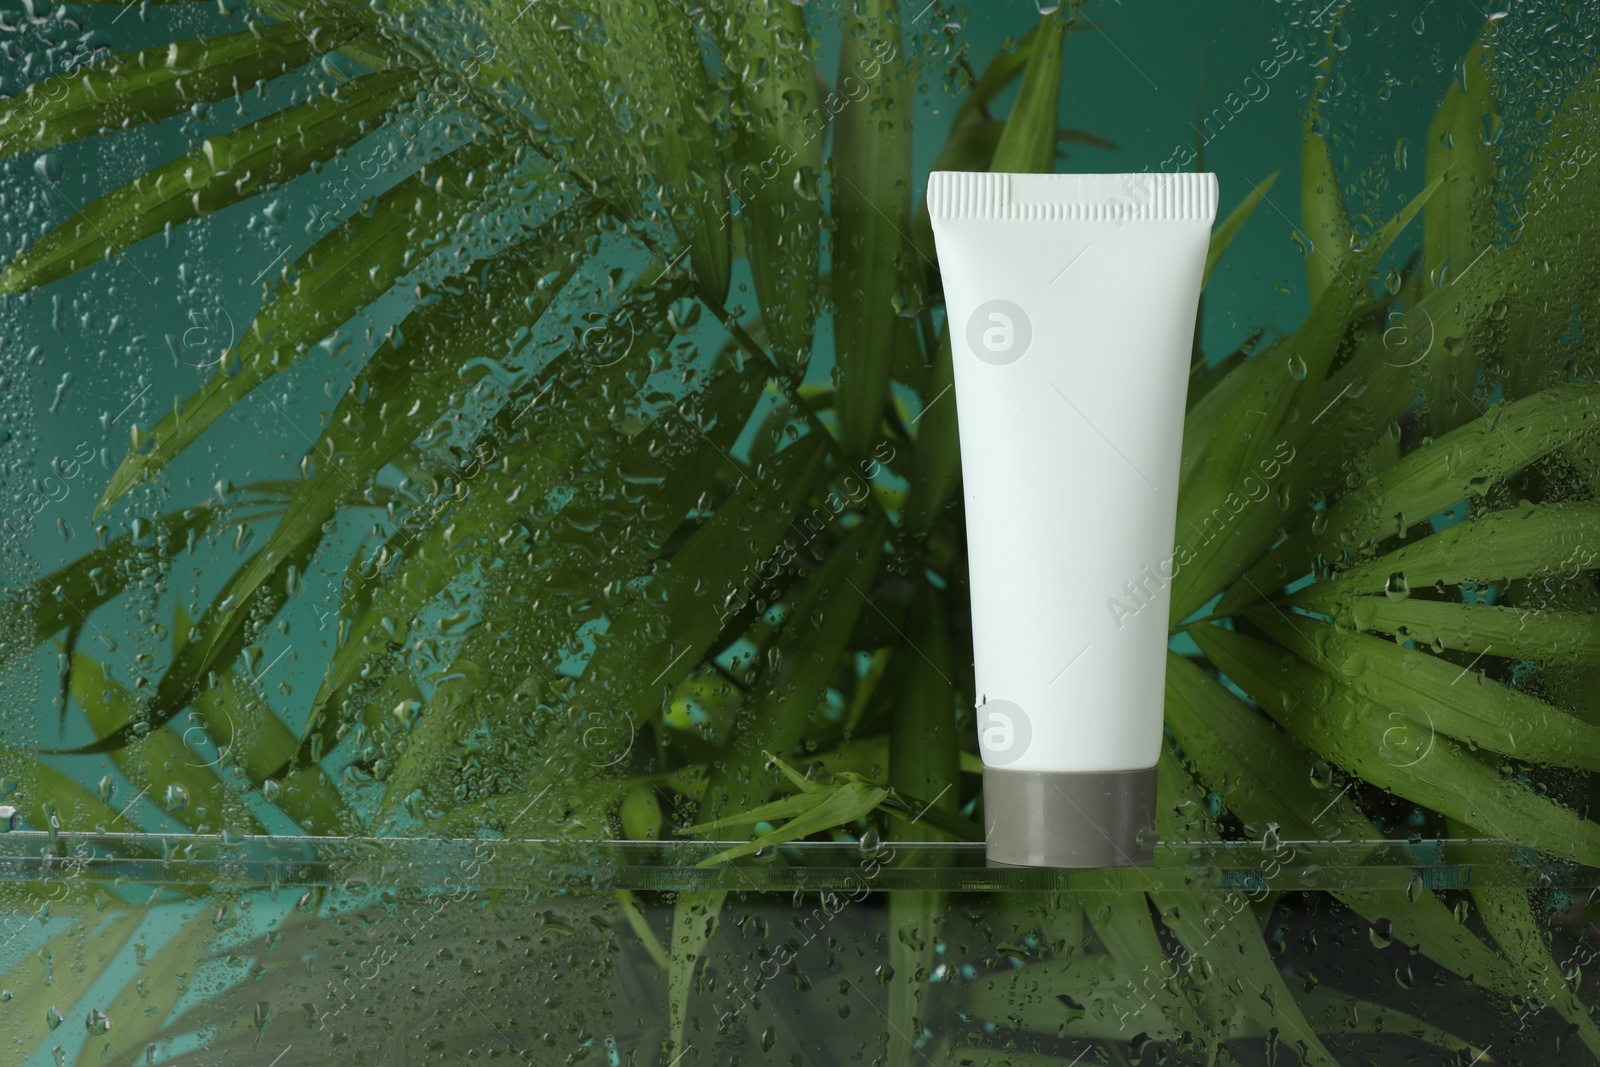 Photo of Tube with moisturizing cream and palm leaves on green background, view through wet glass